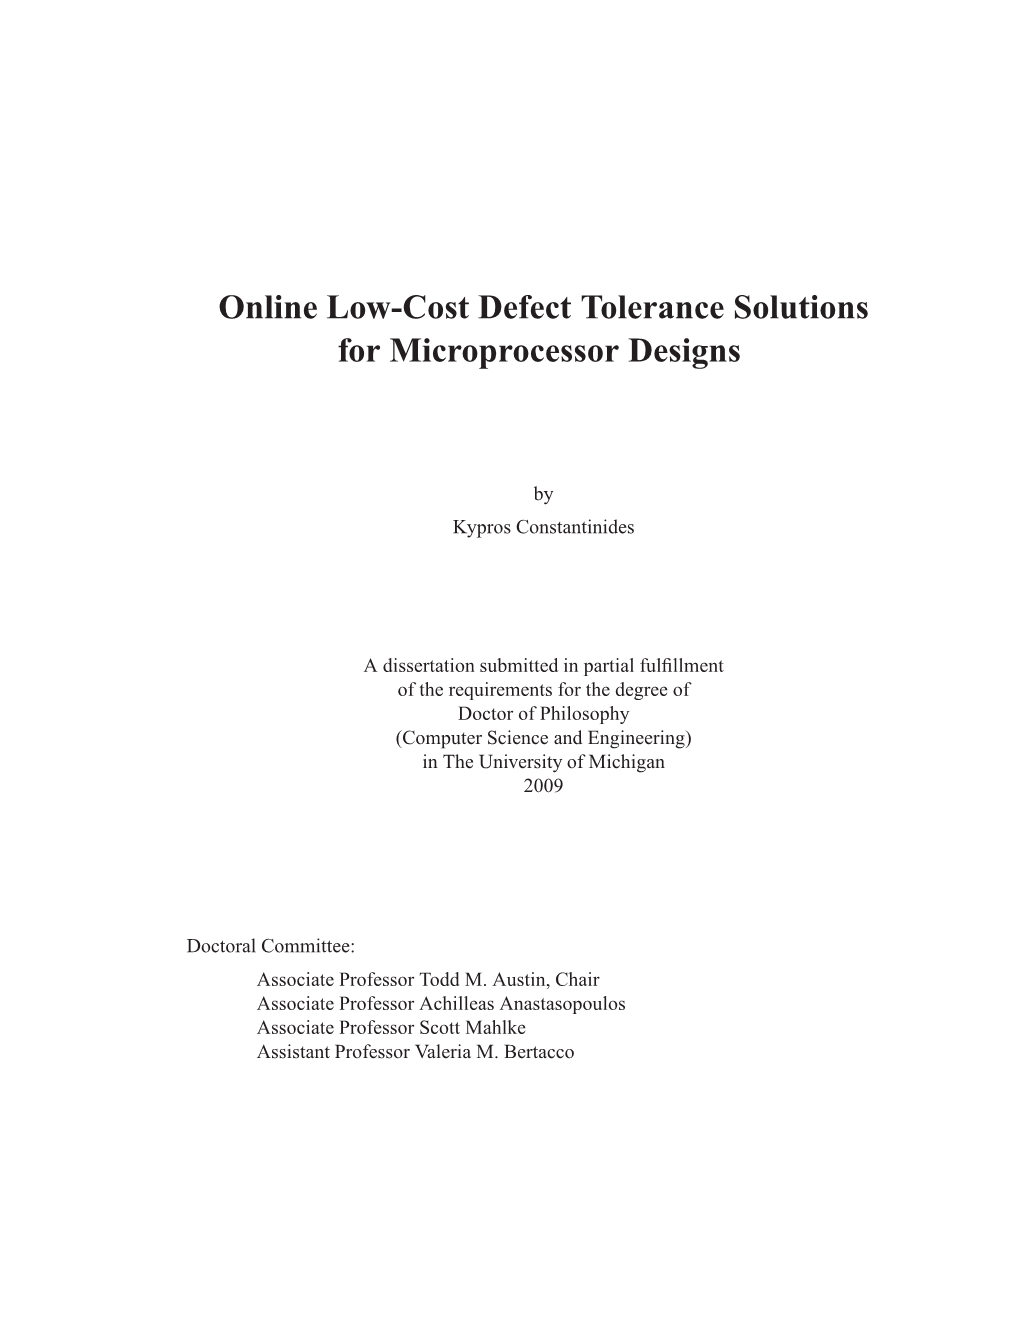 Online Low-Cost Defect Tolerance Solutions for Microprocessor Designs